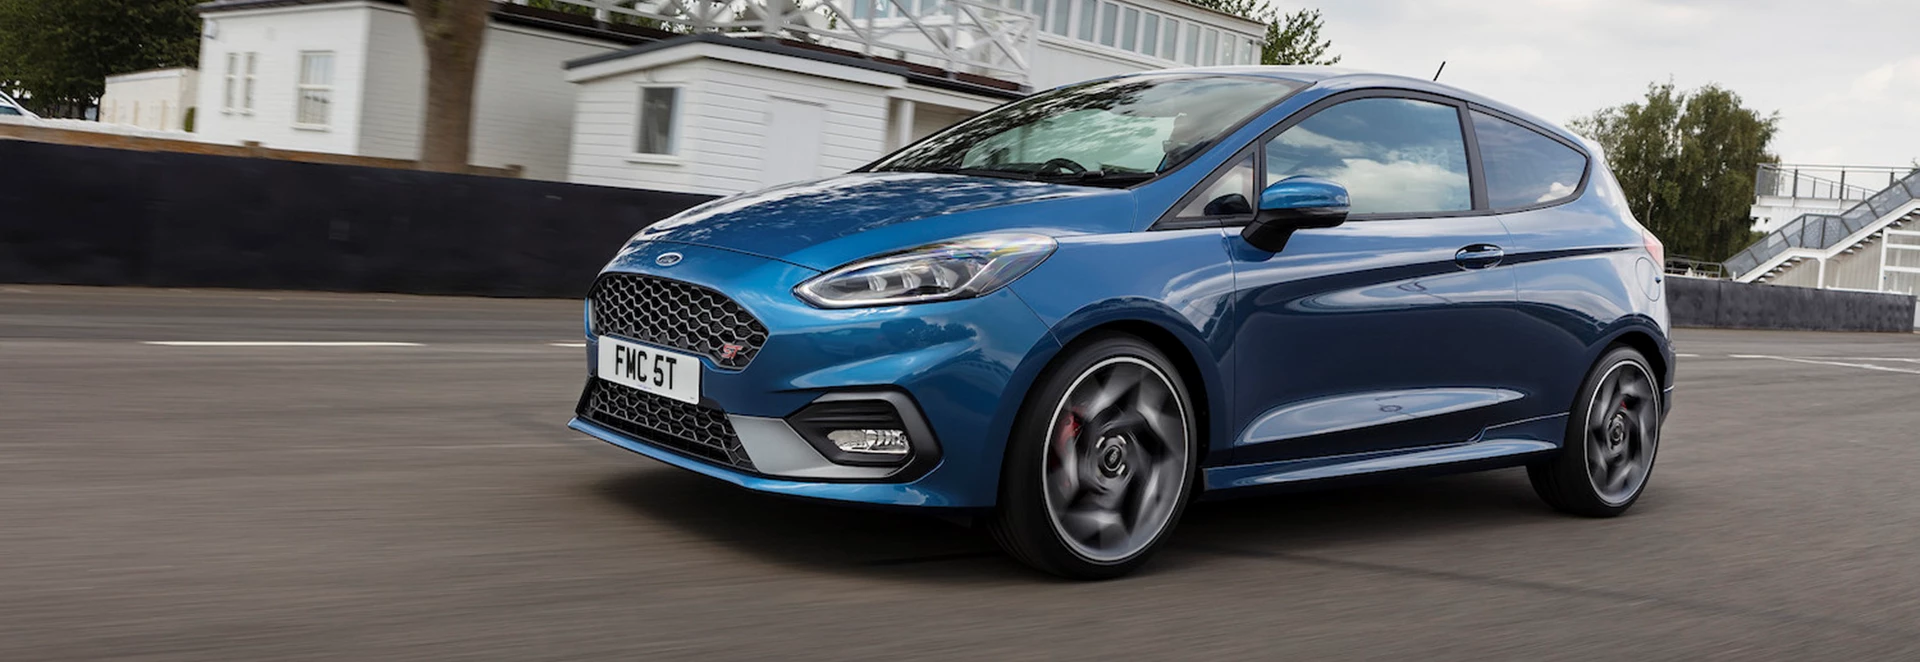 Best-selling cars for March 2019 